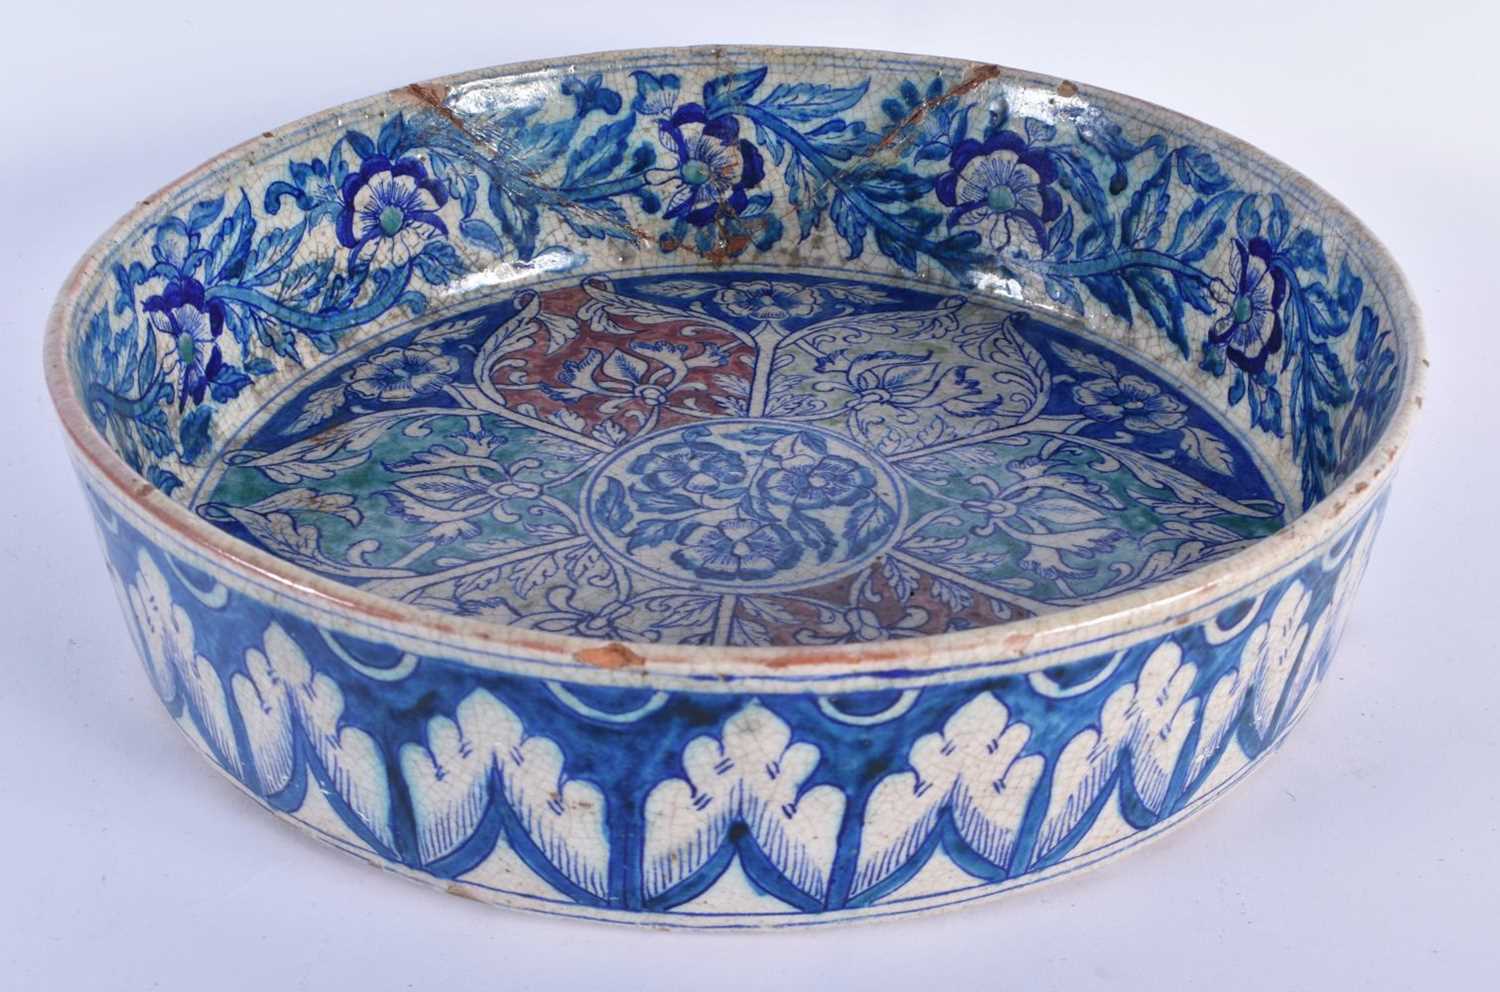 A RARE LARGE 19TH CENTURY MIDDLE EASTERN ISLAMIC IZNIK TYPE POTTERY BASIN painted with panels of - Image 3 of 5